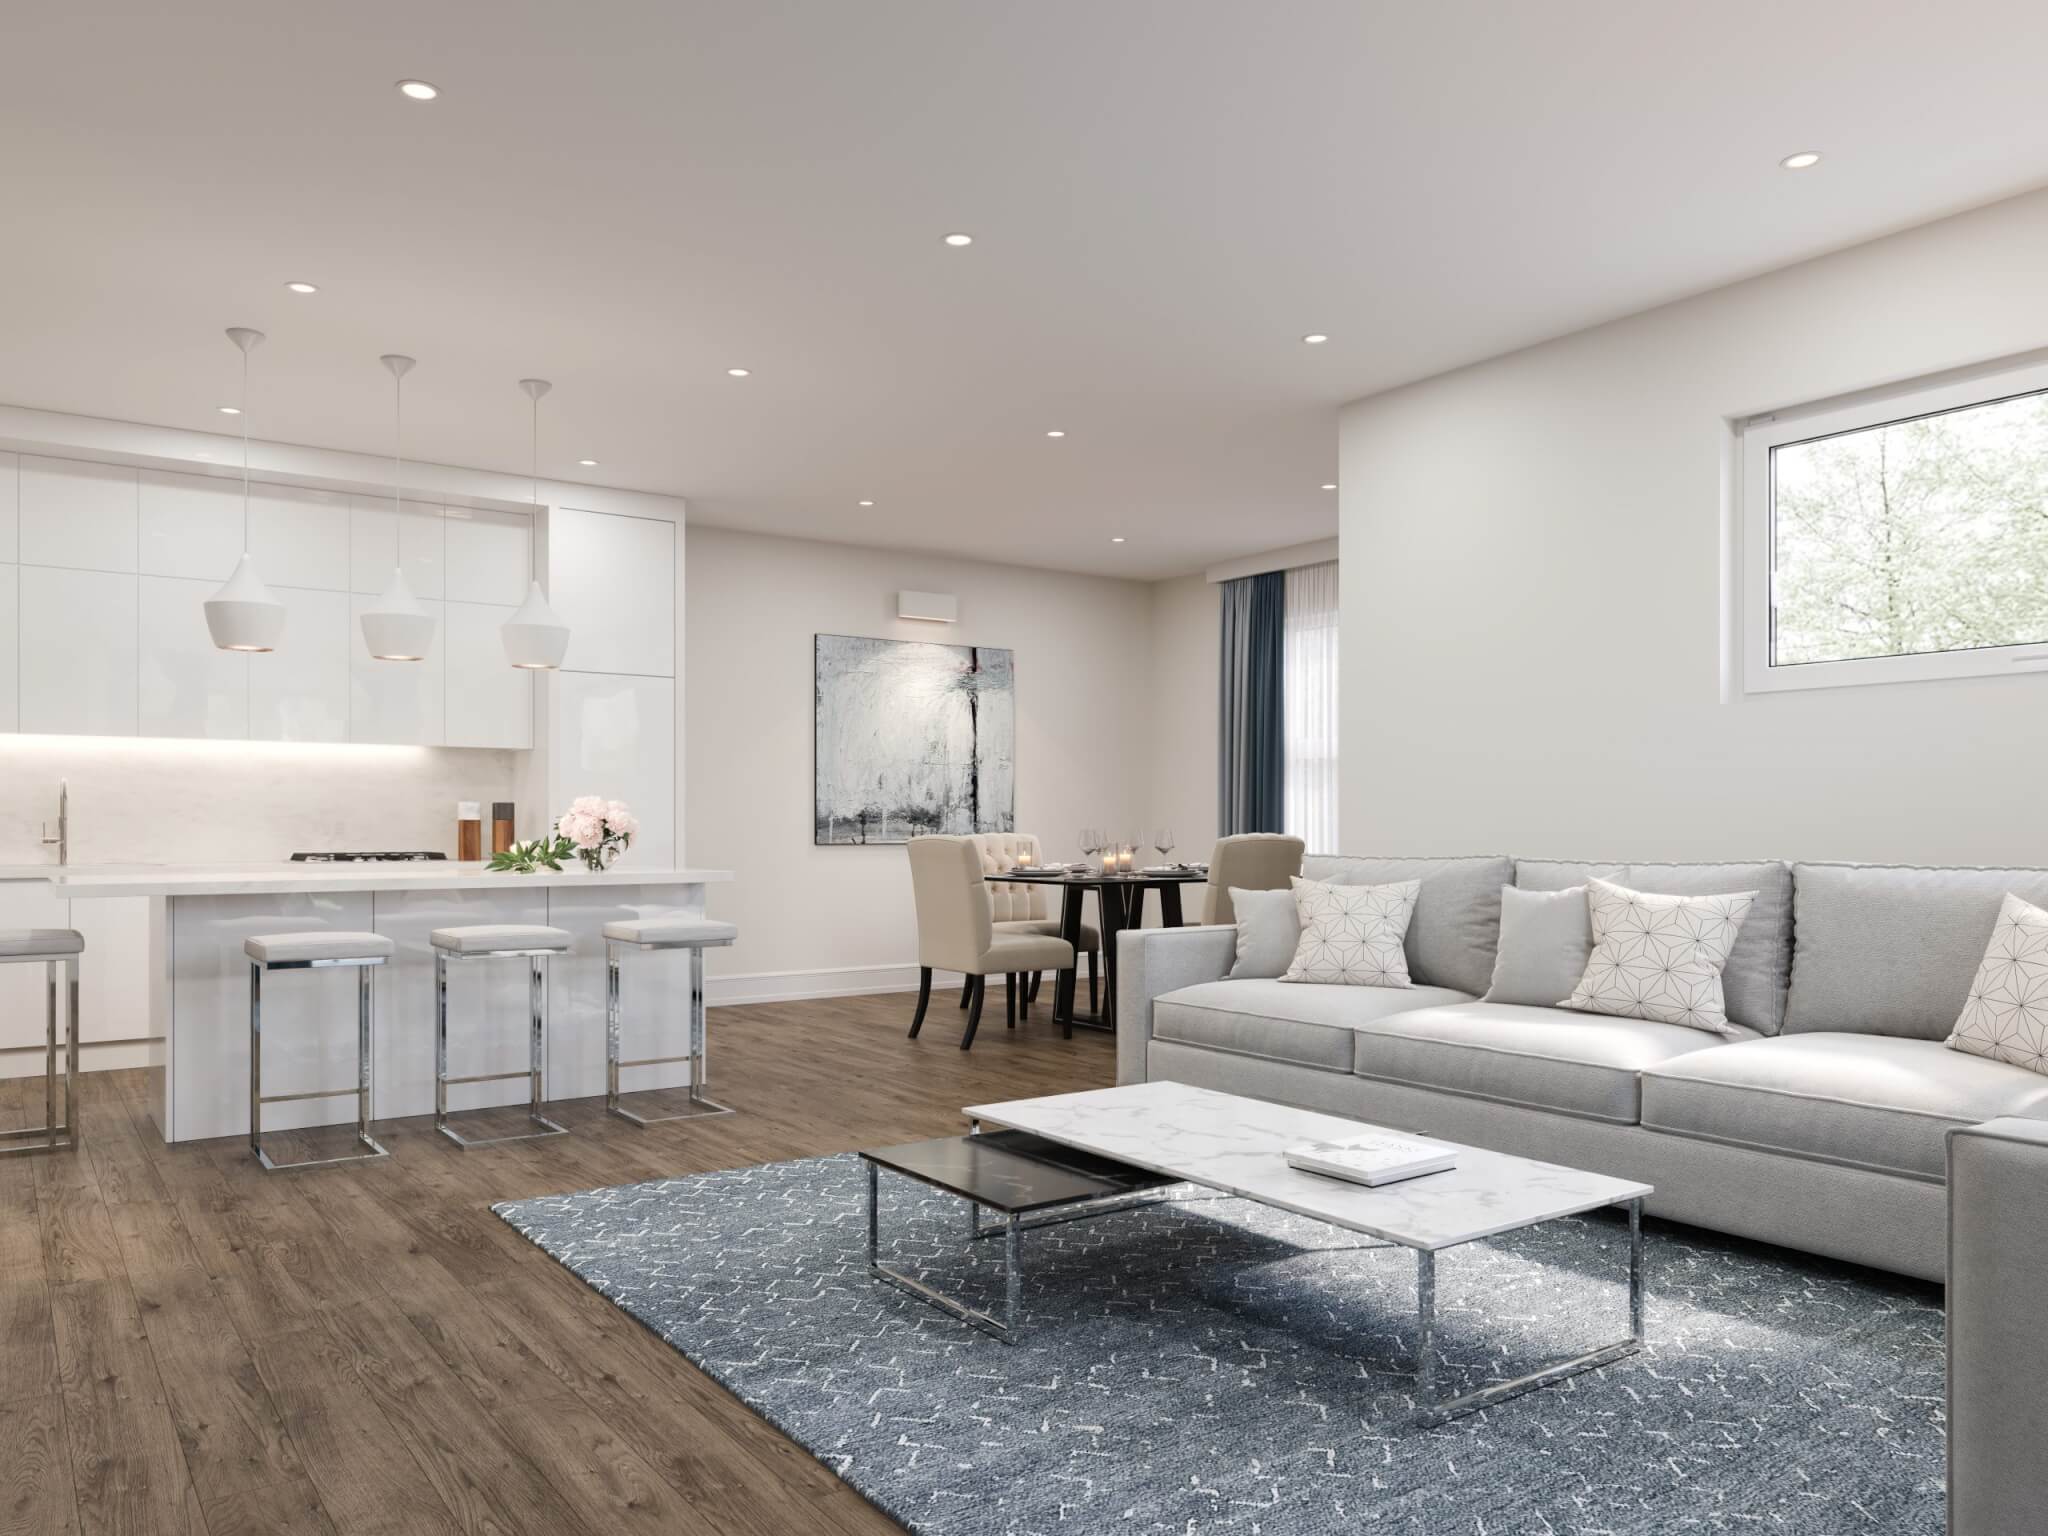 Open concept kitchen and living room, modern and minimalist design with a dining table.